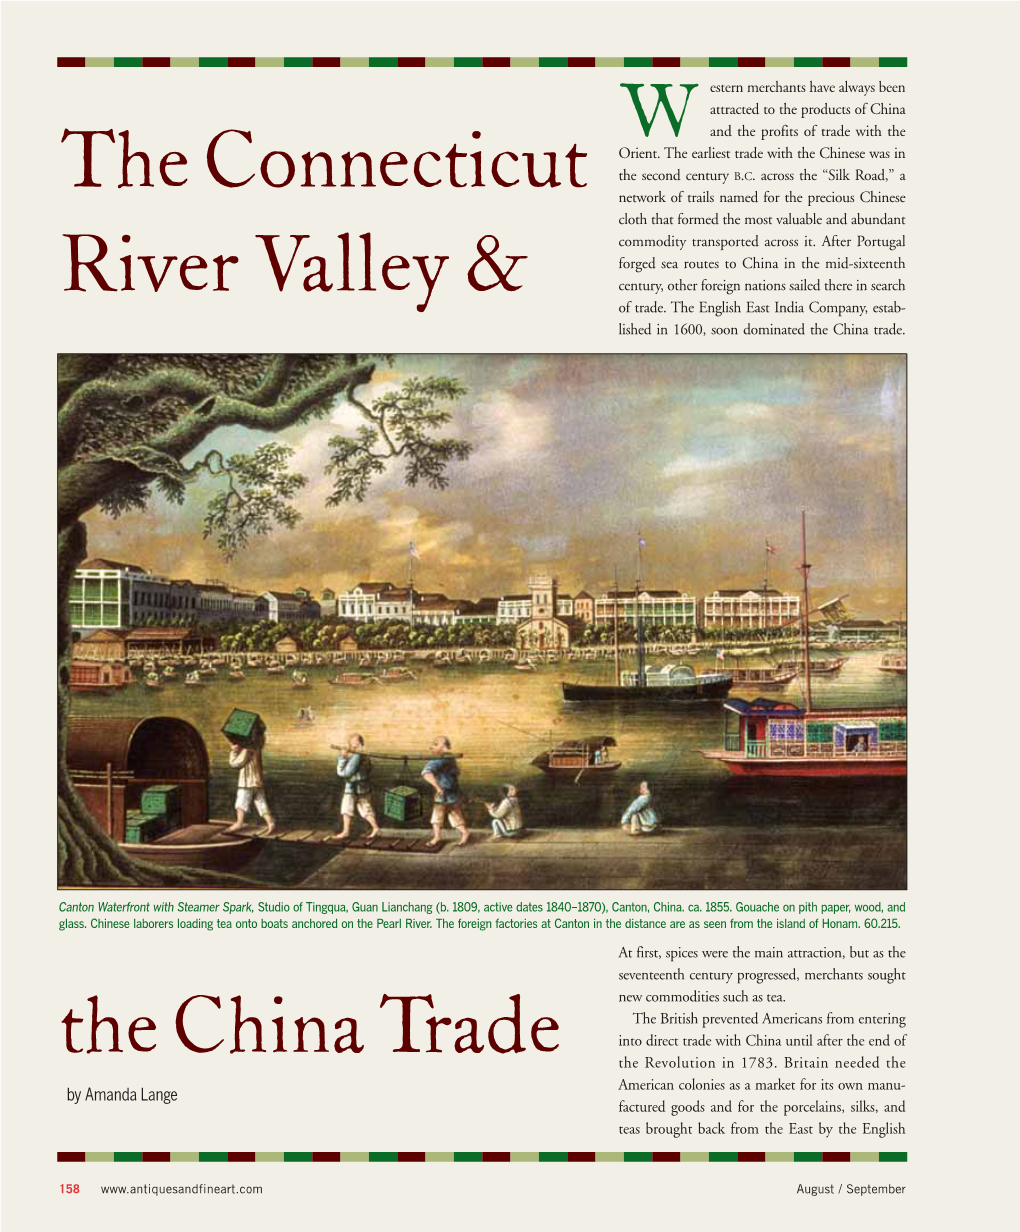 The Connecticut River Valley & the China Trade